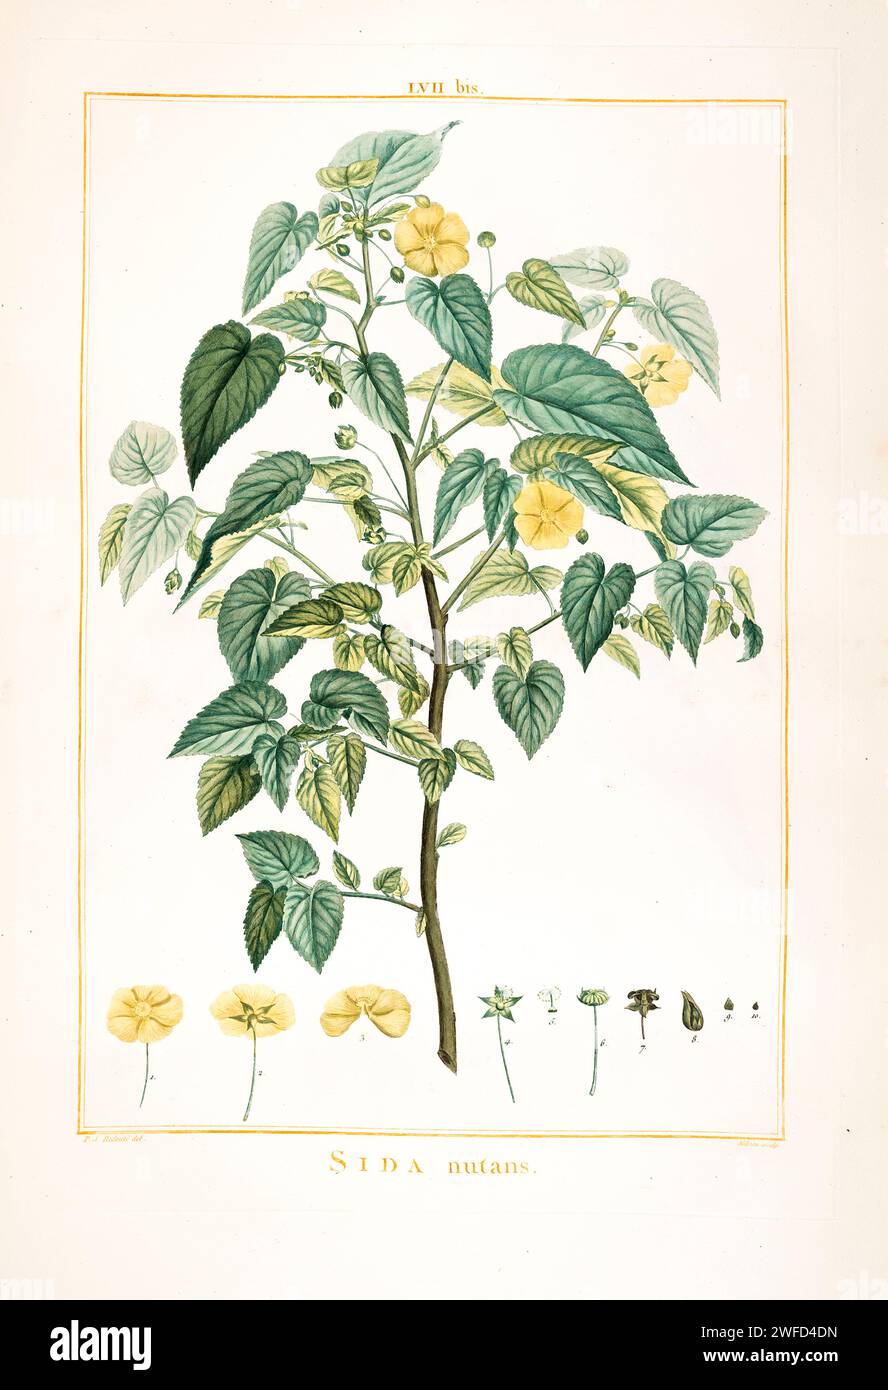 Sida nutans syn Gaya nutans Hand Painted by Pierre-Joseph Redouté and published in Stirpes Novae aut Minus Cognitae (1784) by Charles Louis L'Héritier de Brutelle. Gaya is a genus of flowering plants belonging to the family Malvaceae. It has been classed in the Malvoideae subfamily and the Malveae tribe. It is native to Tropical America with its greatest diversity in Brazil (up to 14 species). It is also found in the countries of Argentina, Bolivia, Colombia, Cuba, Dominican Republic, Ecuador, El Salvador, Guatemala, Guyana, Haiti, Honduras, Leeward Is., Mexico, Nicaragua, Paraguay, Peru, Urug Stock Photo